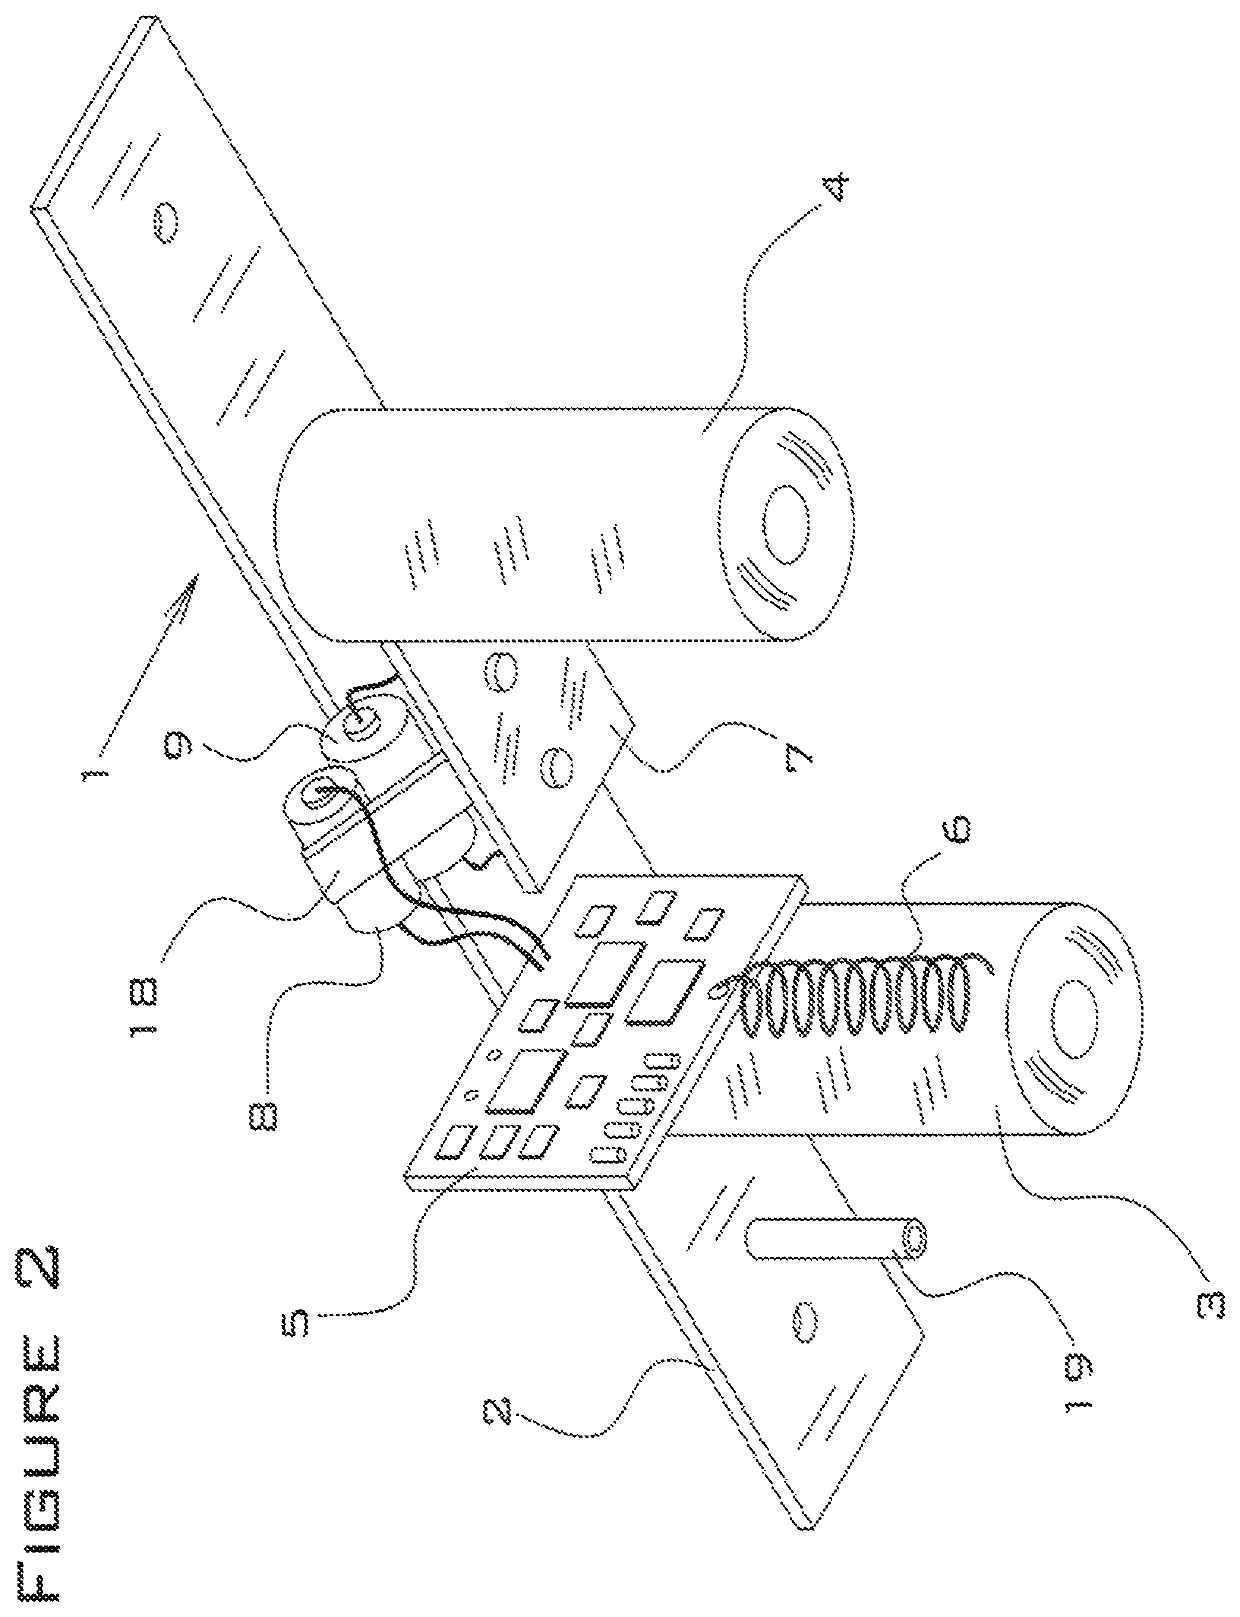 UAV-mounted dispersant device with electronic triggering mechanism